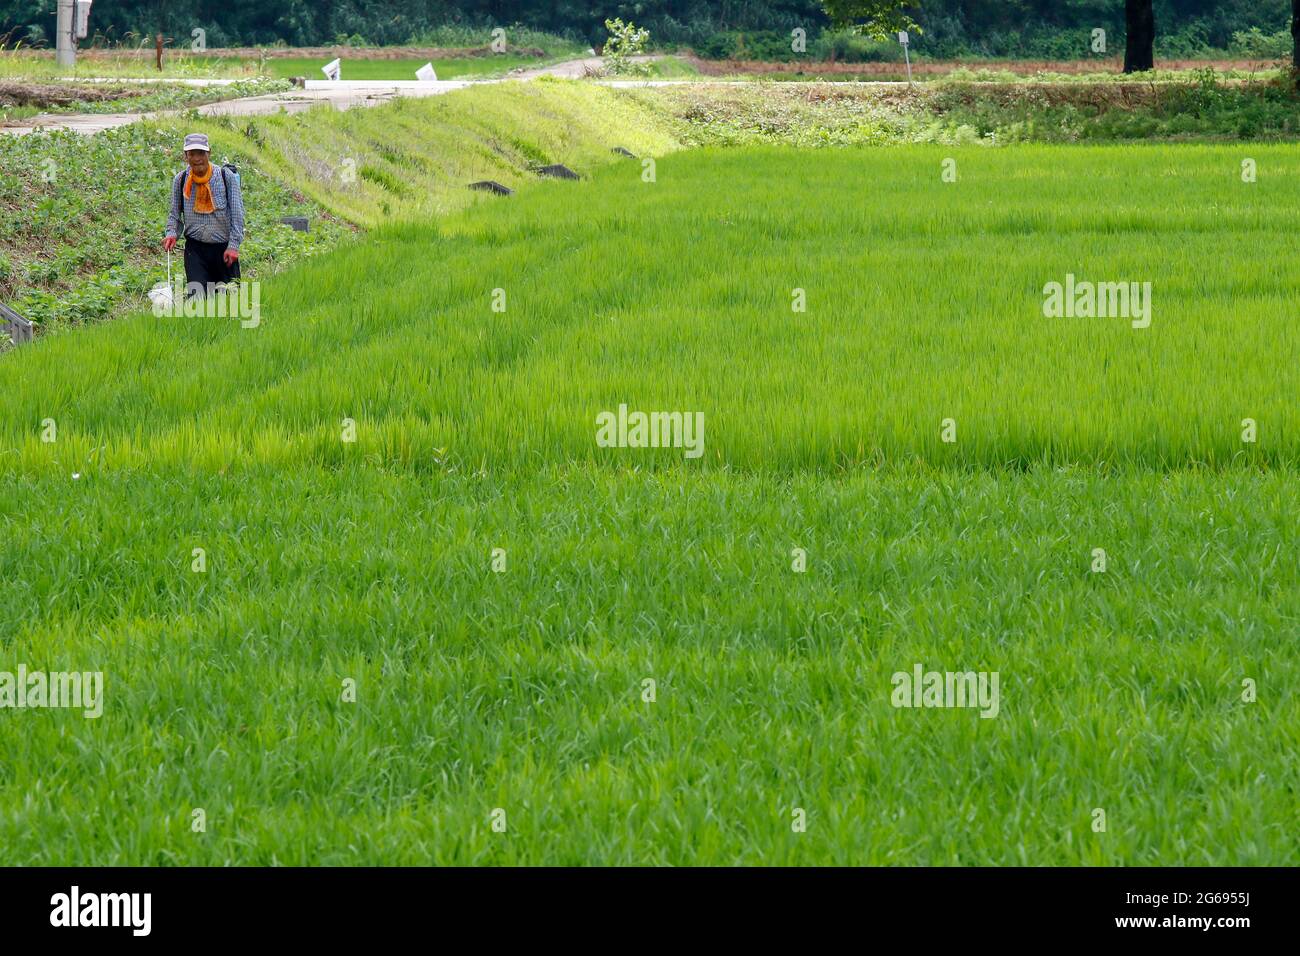 July 4, 2021-Sangju, South Korea-Farmer look their farm field on monsoon season in South Korea. Monsoon rains are likely to hit most parts of the country this weekend, marking the start of the one-month summer rainy season, the state weather agency said Thursday. The Korea Meteorological Administration (KMA) said heavy rains will fall on the southern island of Jeju on Saturday morning and spread to southern and central regions between late Saturday and Sunday. Stock Photo